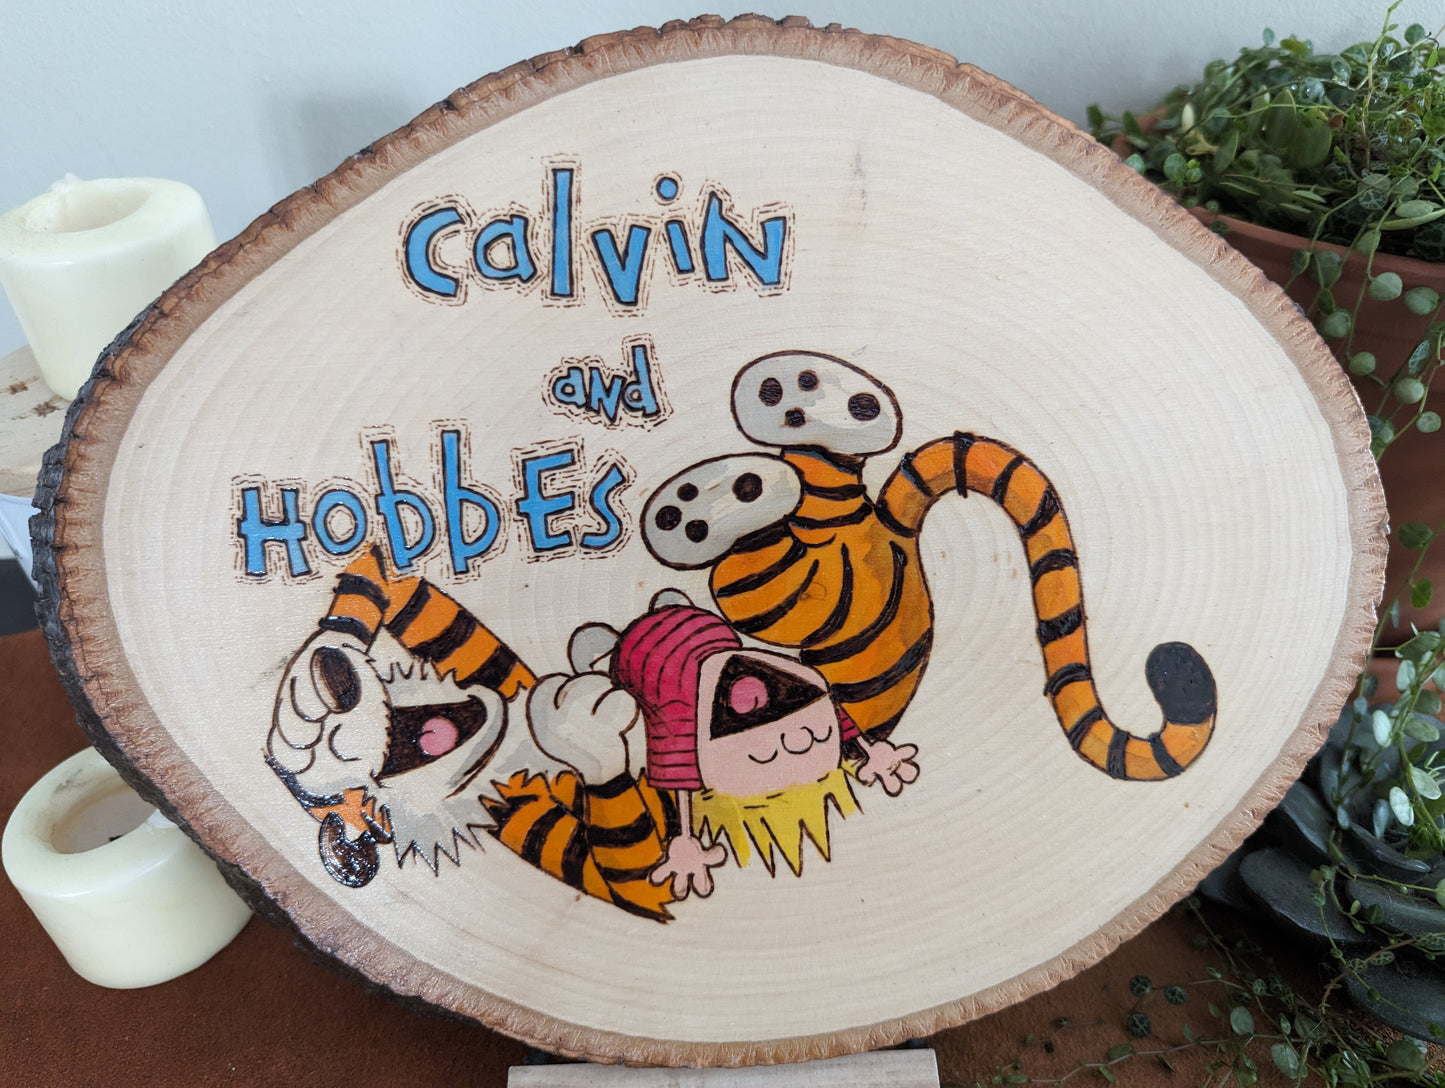 Calvin and Hobbes 'Laughing Friends' Pyrography on Wood Canvas